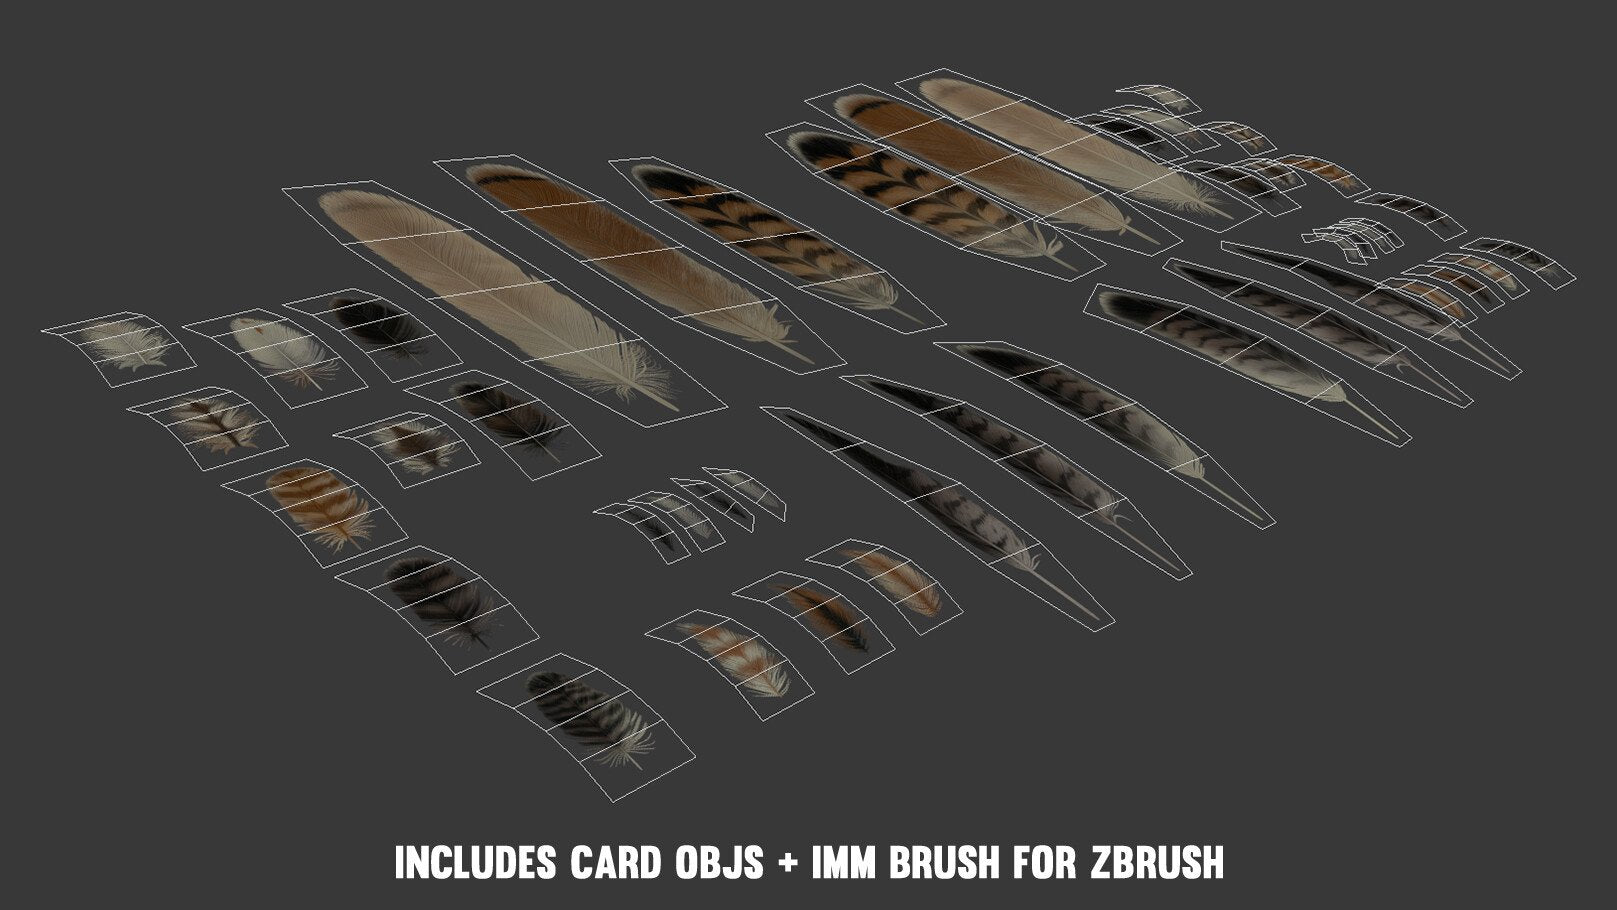 Red-Tailed Hawk Feathers Texture Pack + IMM